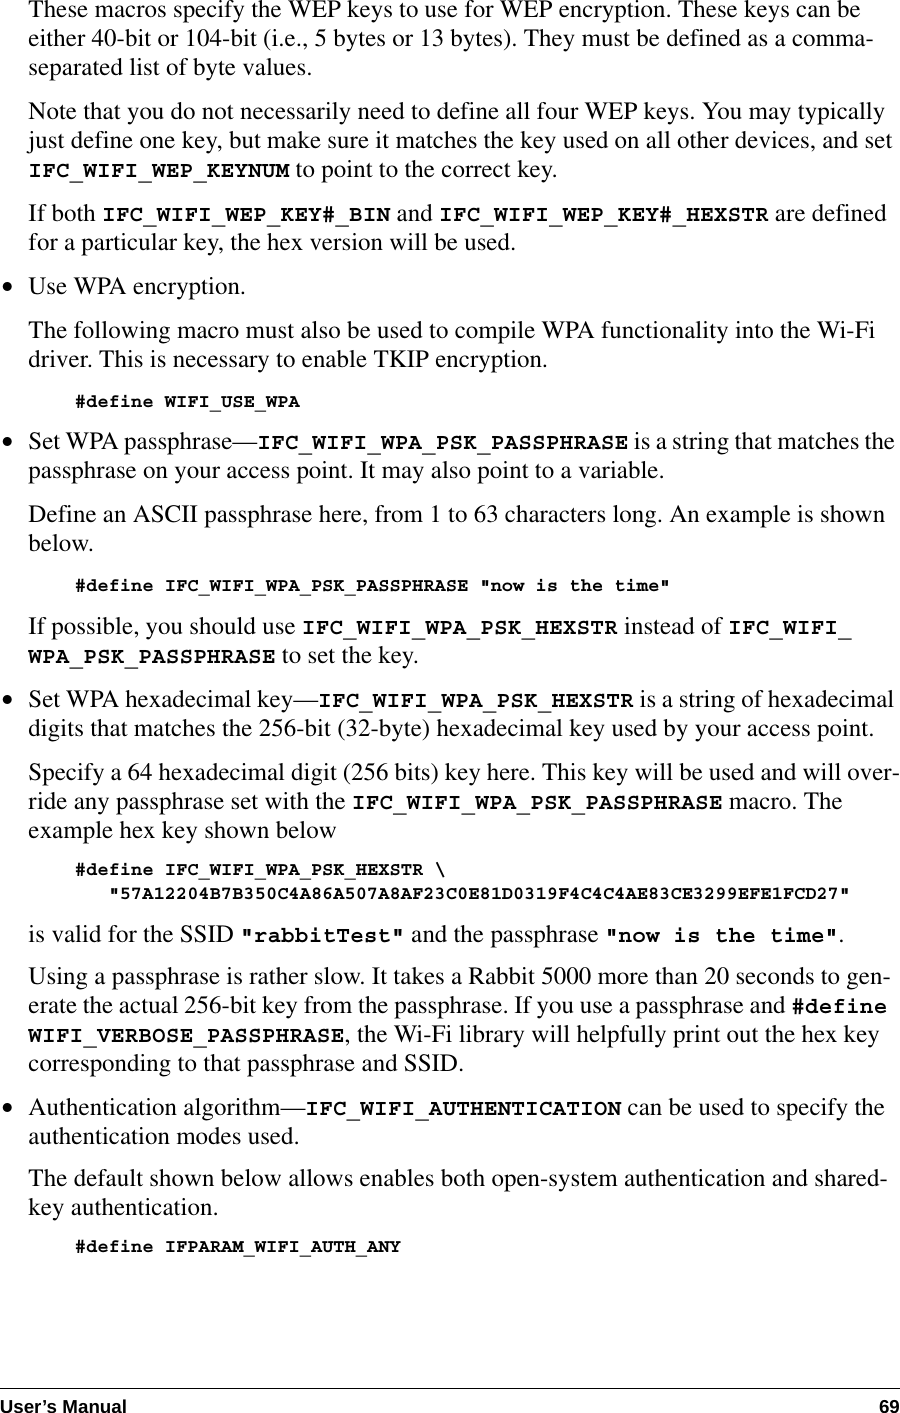 User’s Manual 69These macros specify the WEP keys to use for WEP encryption. These keys can be either 40-bit or 104-bit (i.e., 5 bytes or 13 bytes). They must be defined as a comma-separated list of byte values.Note that you do not necessarily need to define all four WEP keys. You may typically just define one key, but make sure it matches the key used on all other devices, and set IFC_WIFI_WEP_KEYNUM to point to the correct key.If both IFC_WIFI_WEP_KEY#_BIN and IFC_WIFI_WEP_KEY#_HEXSTR are defined for a particular key, the hex version will be used.•Use WPA encryption.The following macro must also be used to compile WPA functionality into the Wi-Fi driver. This is necessary to enable TKIP encryption.#define WIFI_USE_WPA•Set WPA passphrase—IFC_WIFI_WPA_PSK_PASSPHRASE is a string that matches the passphrase on your access point. It may also point to a variable.Define an ASCII passphrase here, from 1 to 63 characters long. An example is shown below.#define IFC_WIFI_WPA_PSK_PASSPHRASE &quot;now is the time&quot;If possible, you should use IFC_WIFI_WPA_PSK_HEXSTR instead of IFC_WIFI_WPA_PSK_PASSPHRASE to set the key.•Set WPA hexadecimal key—IFC_WIFI_WPA_PSK_HEXSTR is a string of hexadecimal digits that matches the 256-bit (32-byte) hexadecimal key used by your access point.Specify a 64 hexadecimal digit (256 bits) key here. This key will be used and will over-ride any passphrase set with the IFC_WIFI_WPA_PSK_PASSPHRASE macro. The example hex key shown below#define IFC_WIFI_WPA_PSK_HEXSTR \   &quot;57A12204B7B350C4A86A507A8AF23C0E81D0319F4C4C4AE83CE3299EFE1FCD27&quot;is valid for the SSID &quot;rabbitTest&quot; and the passphrase &quot;now is the time&quot;.Using a passphrase is rather slow. It takes a Rabbit 5000 more than 20 seconds to gen-erate the actual 256-bit key from the passphrase. If you use a passphrase and #define WIFI_VERBOSE_PASSPHRASE, the Wi-Fi library will helpfully print out the hex key corresponding to that passphrase and SSID.•Authentication algorithm—IFC_WIFI_AUTHENTICATION can be used to specify the authentication modes used.The default shown below allows enables both open-system authentication and shared-key authentication.#define IFPARAM_WIFI_AUTH_ANY